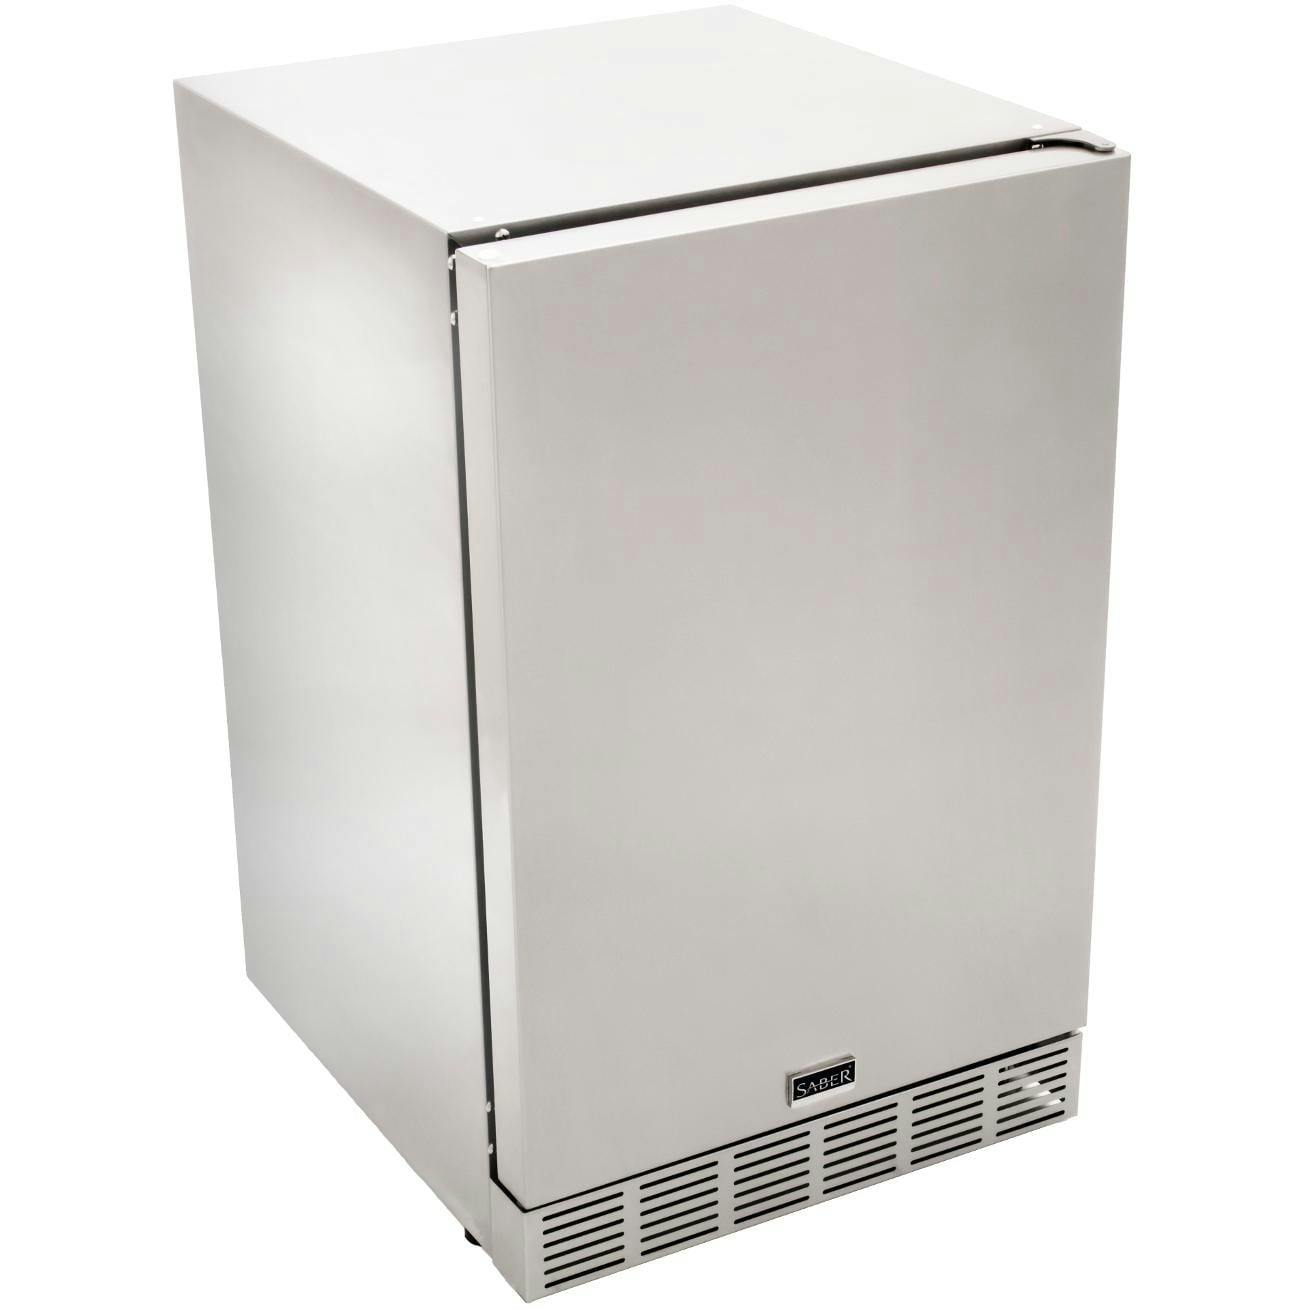 Saber 21-Inch 4.1 Cu. Ft. Outdoor Rated Compact Refrigerator